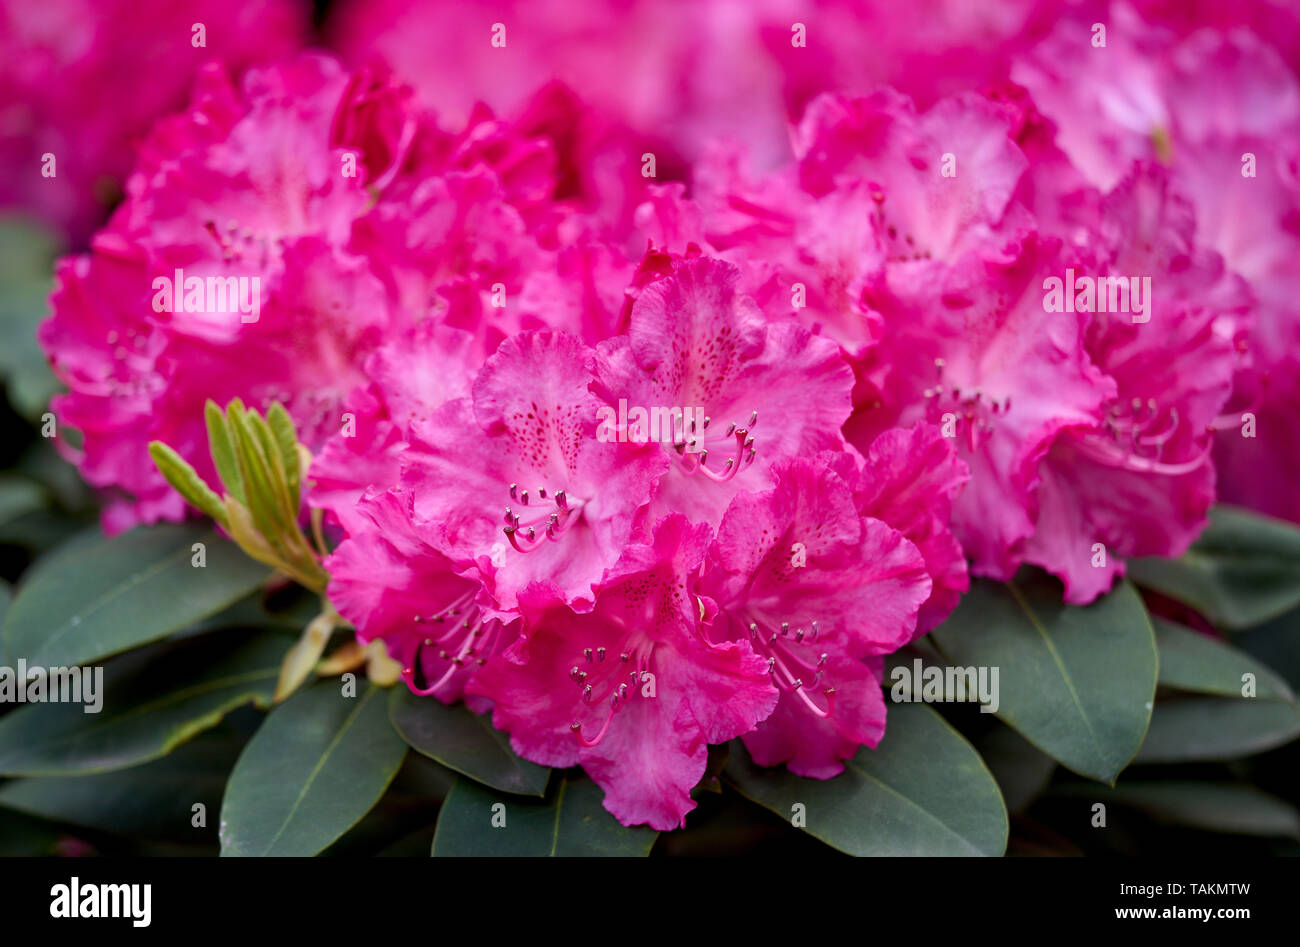 Pink Rhodododendron Germania flowers close up Stock Photo